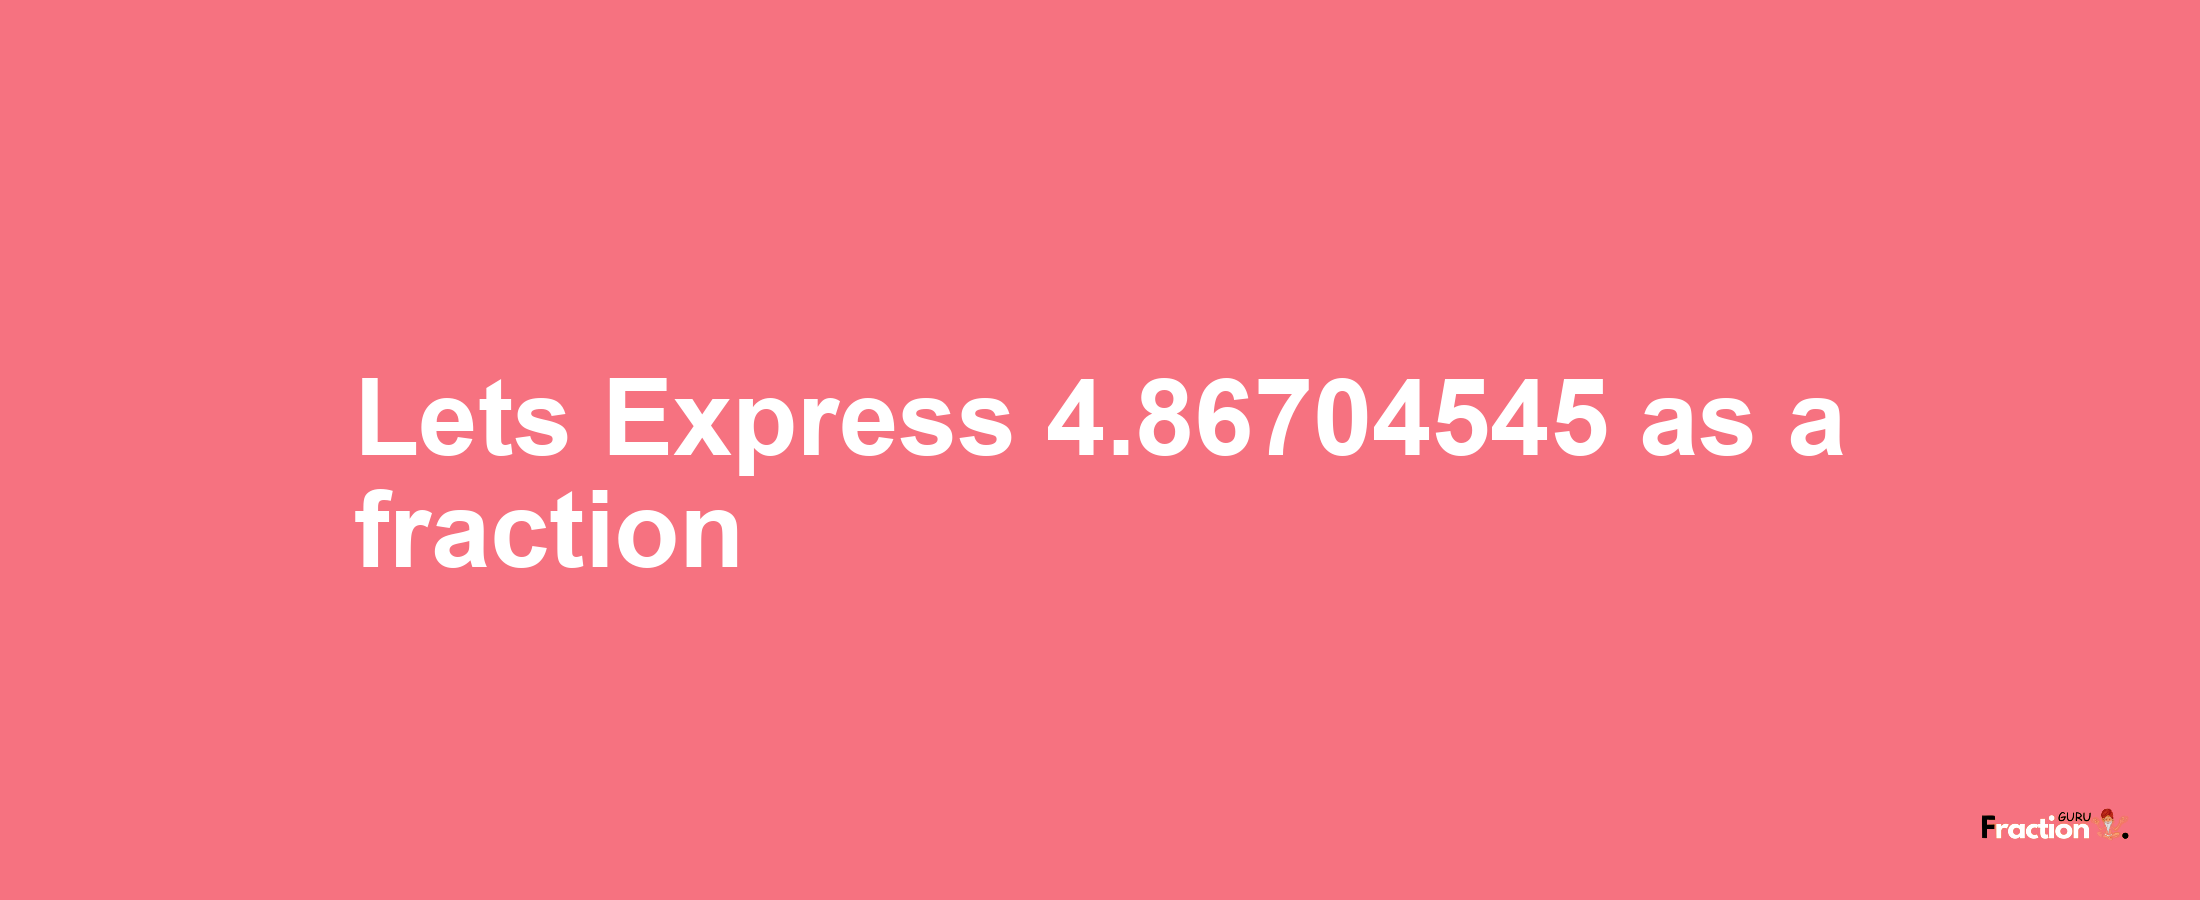 Lets Express 4.86704545 as afraction